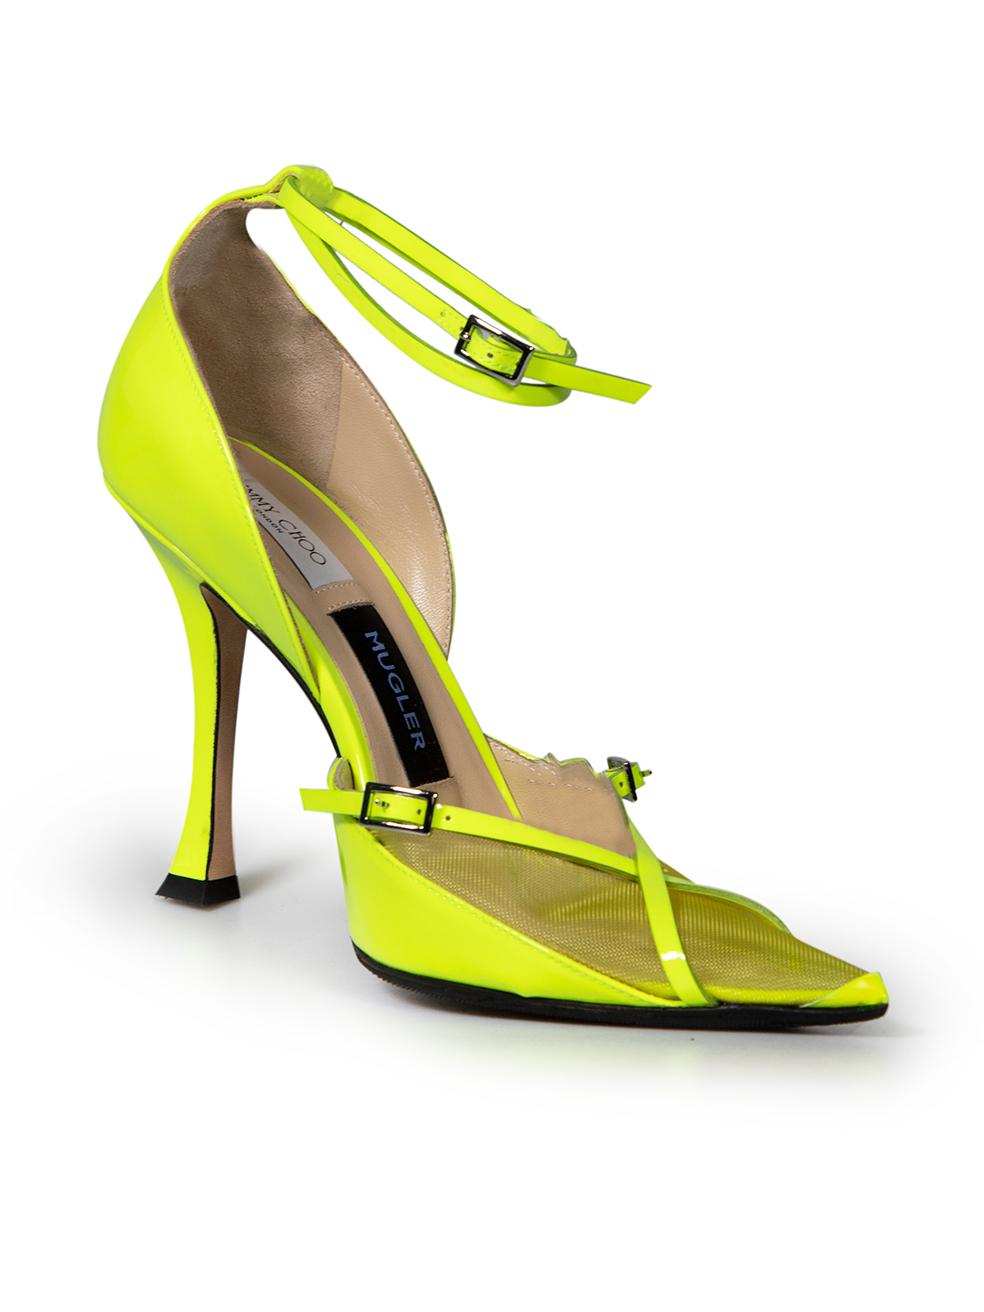 CONDITION is Never worn. No visible wear to shoes is evident on this new Jimmy Choo x Mugler designer resale item. These shoes have been partially re-soled and come with original box and dust bags.
 
 
 
 Details
 
 
 Jimmy Choo x Mugler
 
 Neon